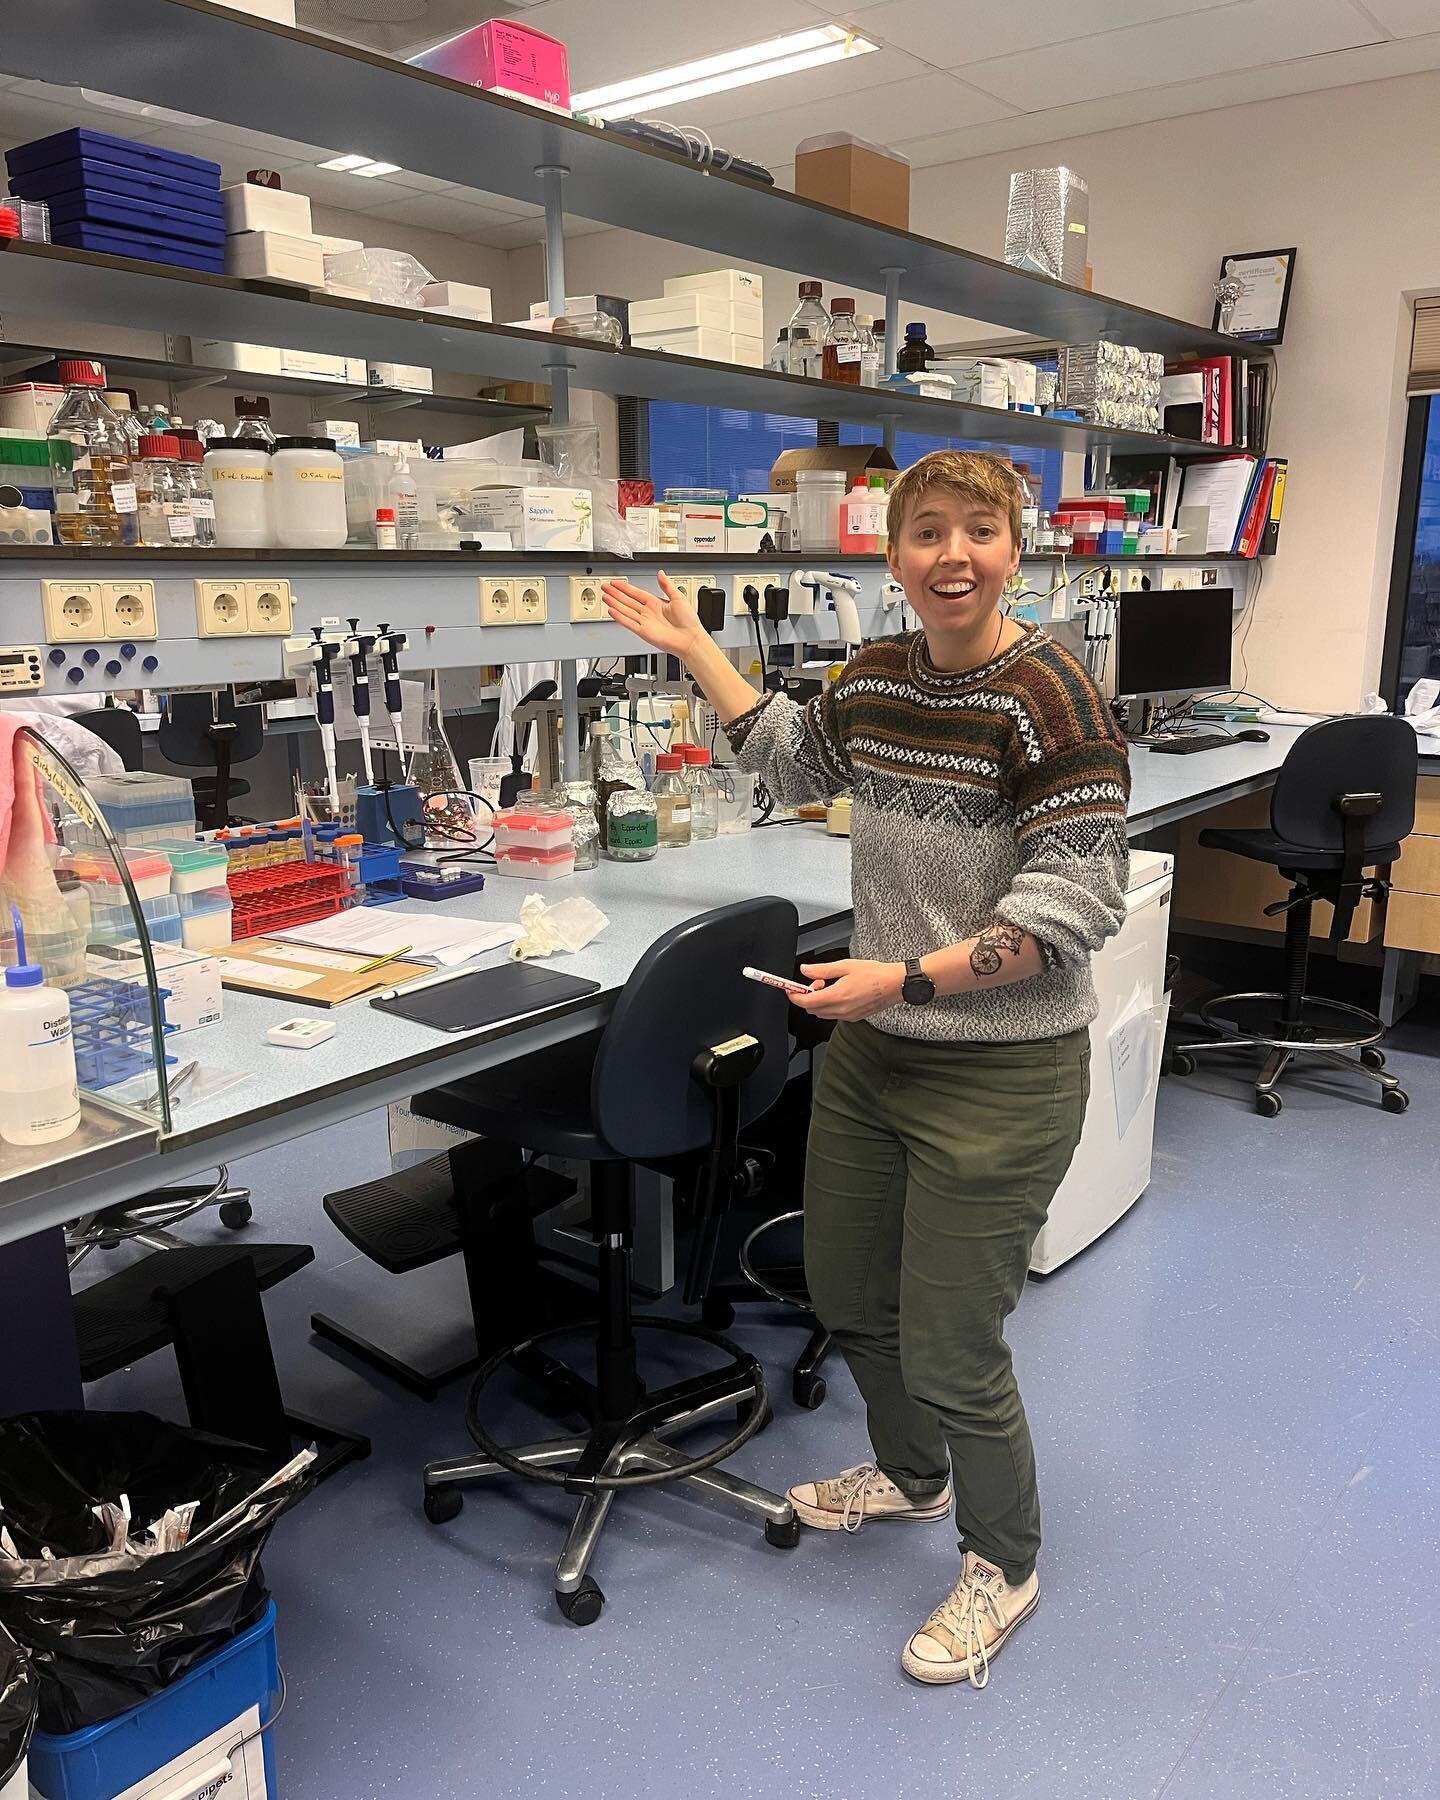 No longer in no-man&rsquo;s land! Kae has claimed their very own lab bench space at the Ciliarium! 🎉🎉🎉 @whitingpc